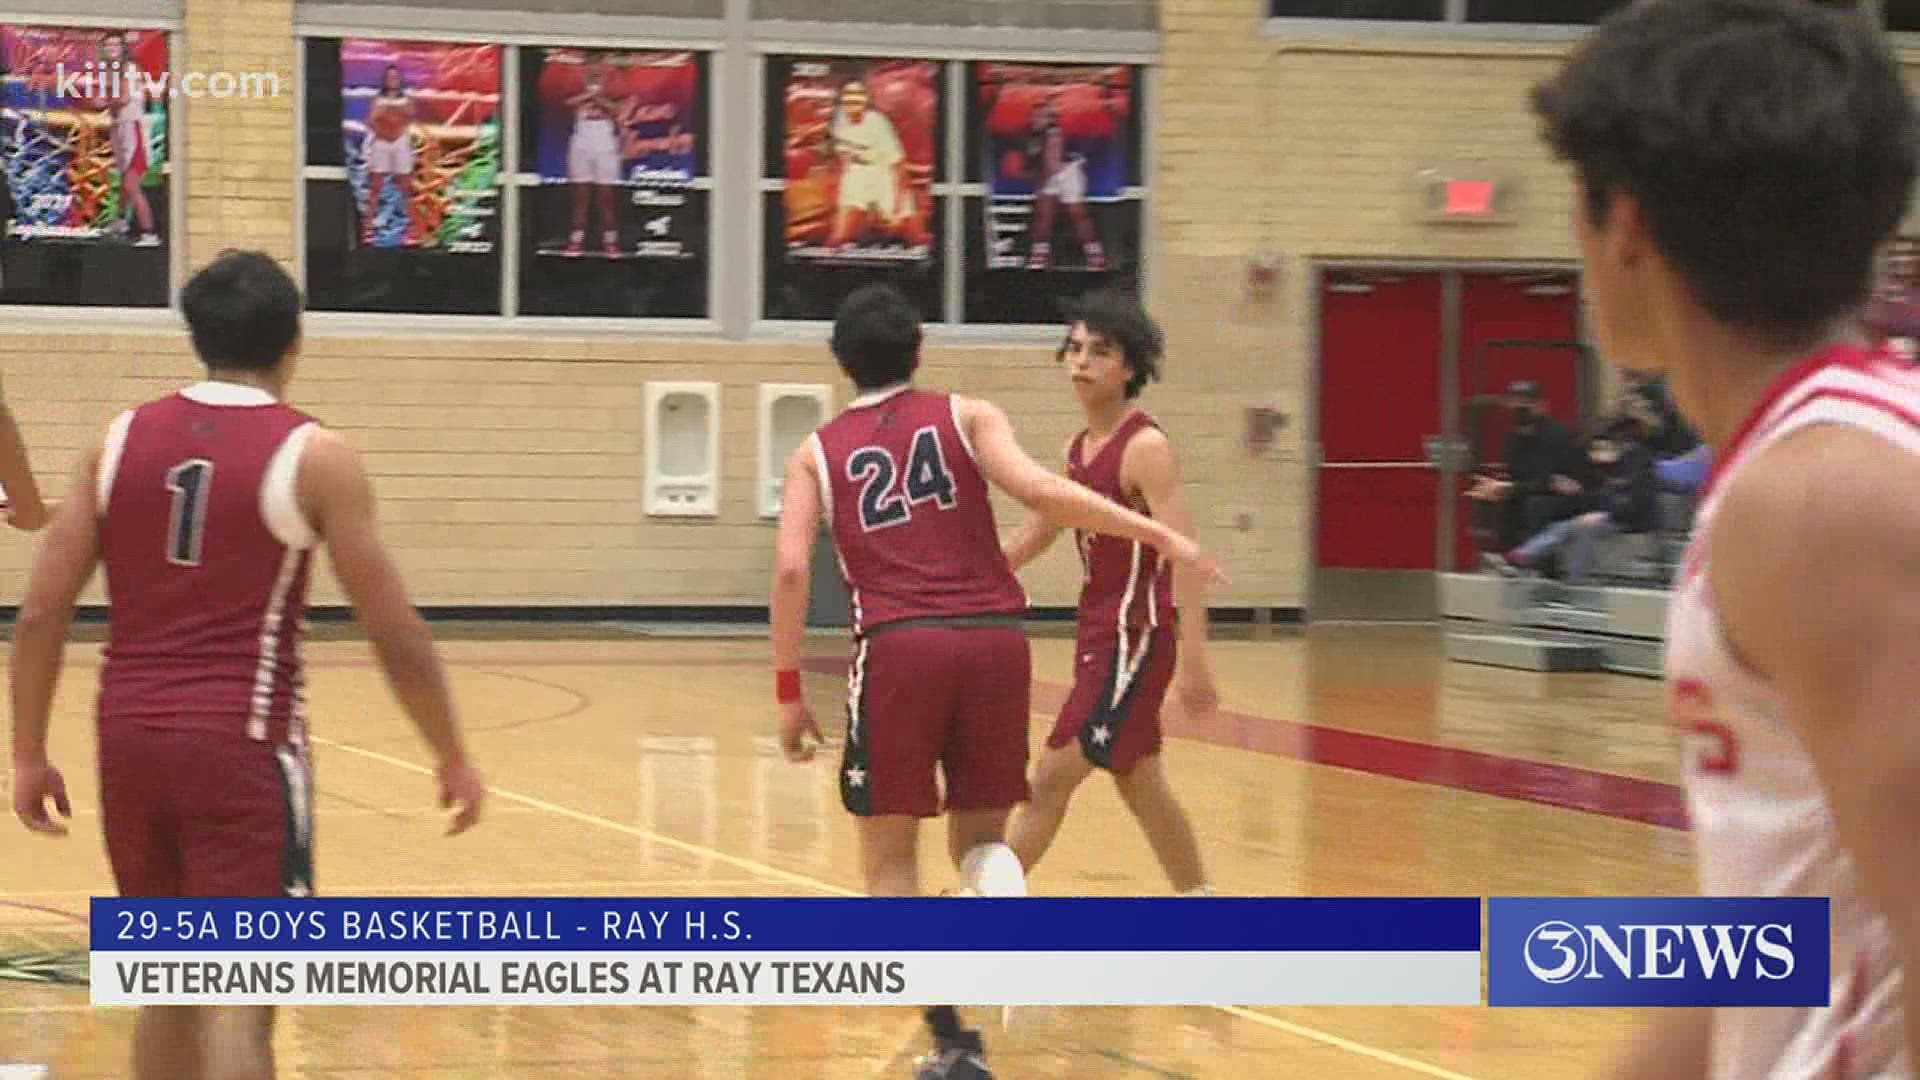 The Eagles got out to a hot start then tempered a Ray run at the end of the first quarter to win big 82-47 and secure first place outright in 29-5A.